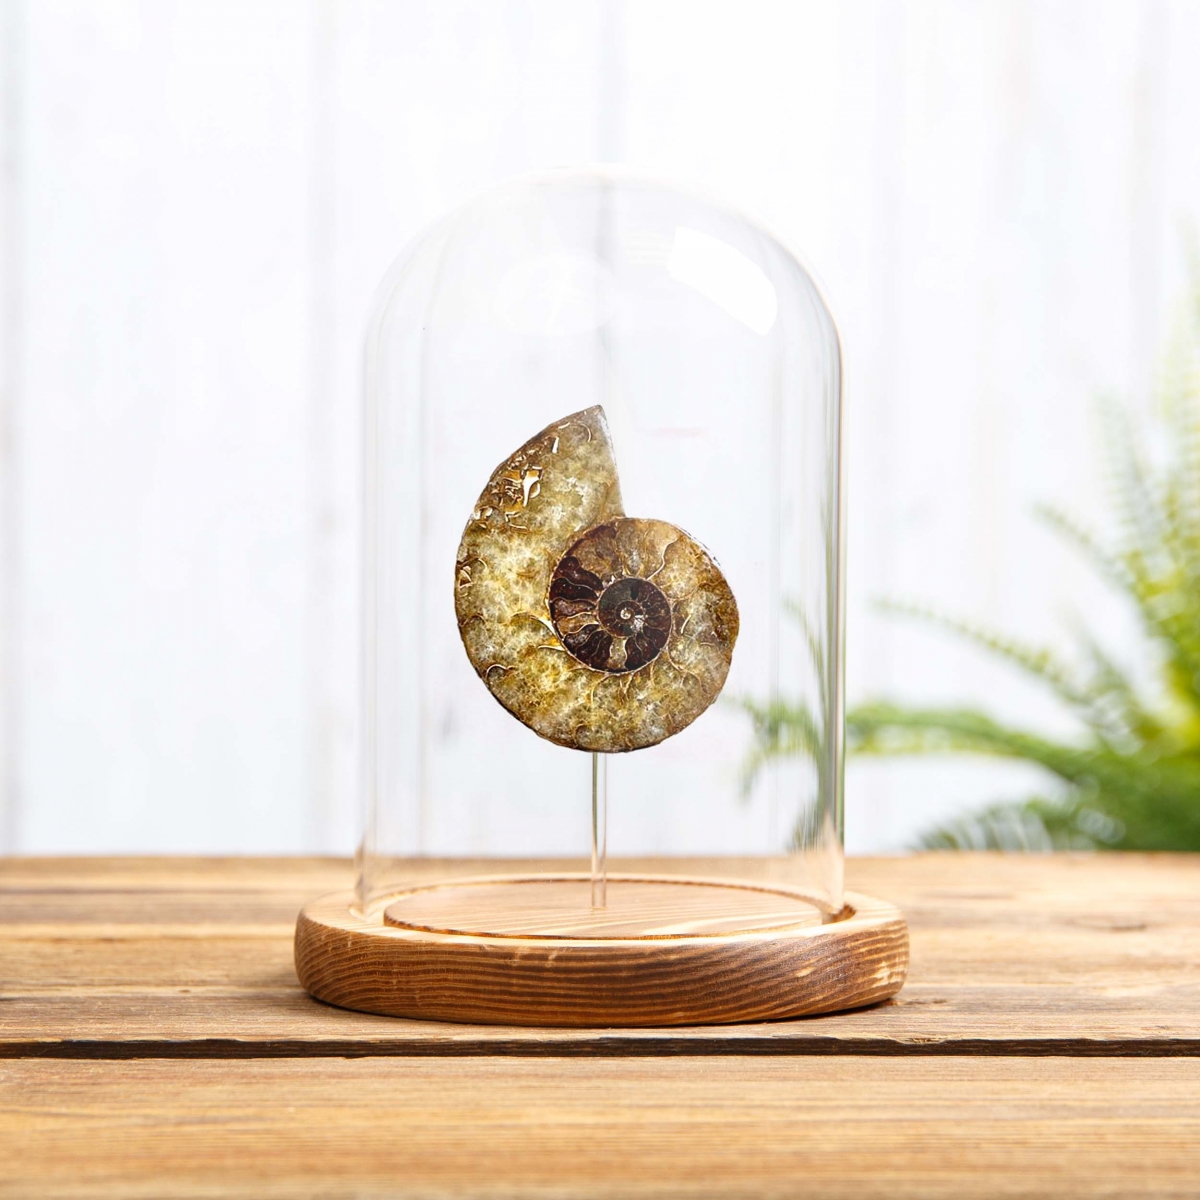 Ammonite Cut and Polished Fossil in Glass Dome with Wooden Base (Cleoniceras sp)